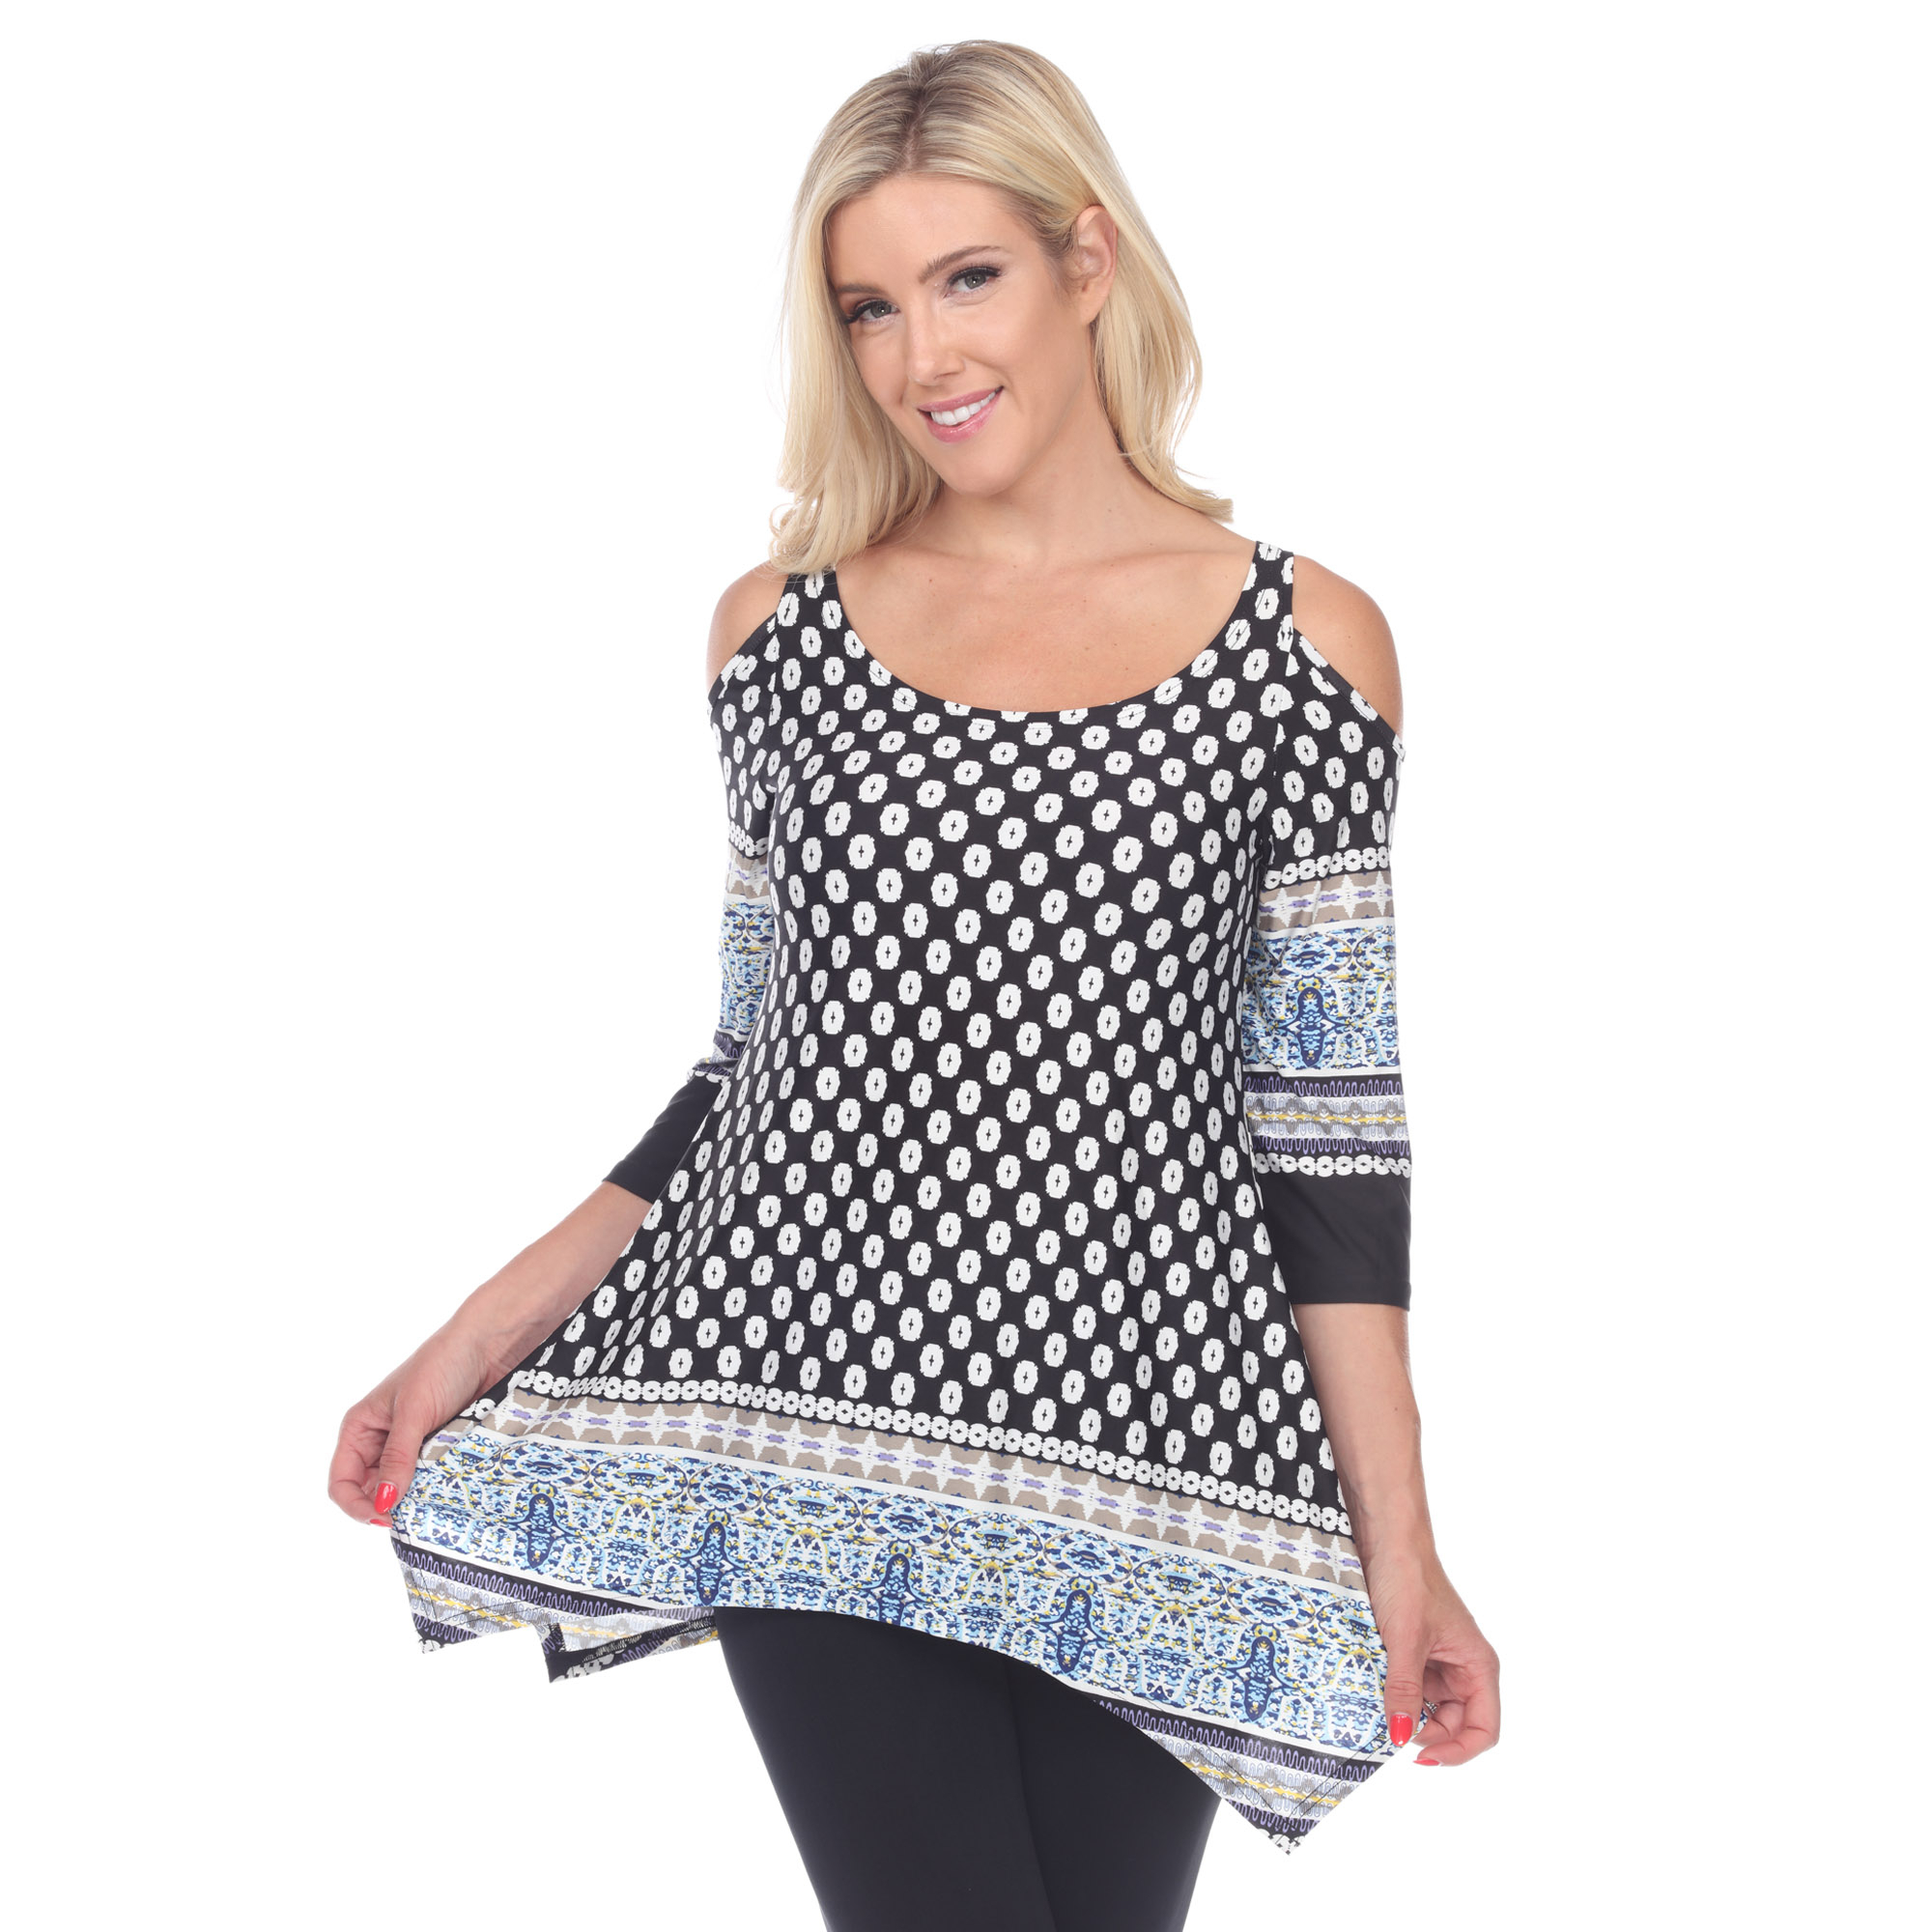 White Mark Women's Cold Shoulder Quarter Sleeve Printed Tunic Top With Pockets - Black/White Polka Dots, 2X